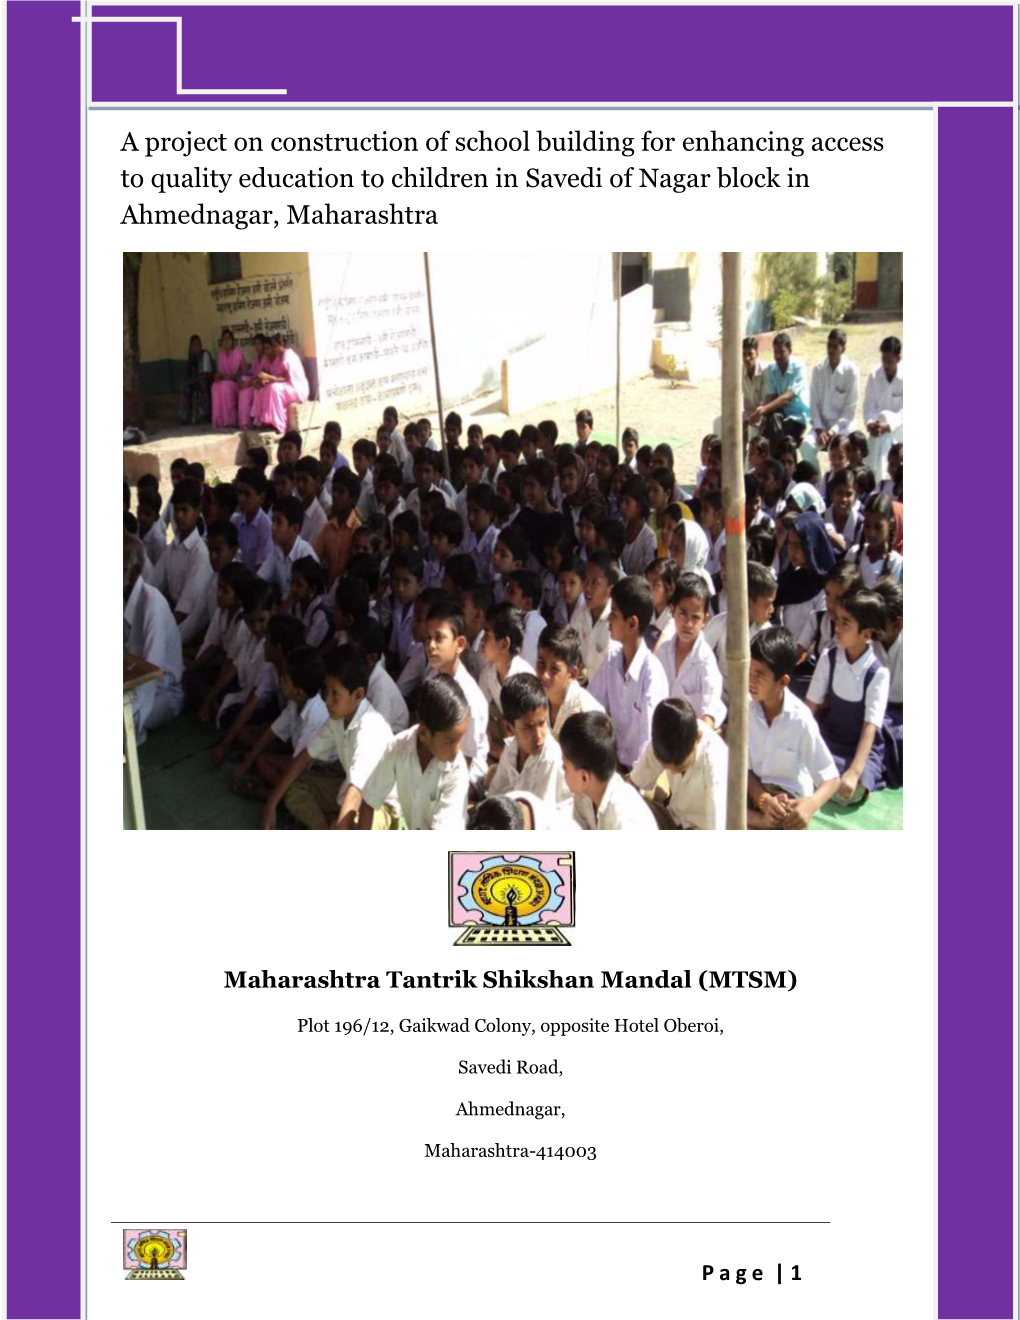 A Project on Construction of School Building for Enhancing Access to Quality Education to Children in Savedi of Nagar Block in Ahmednagar, Maharashtra